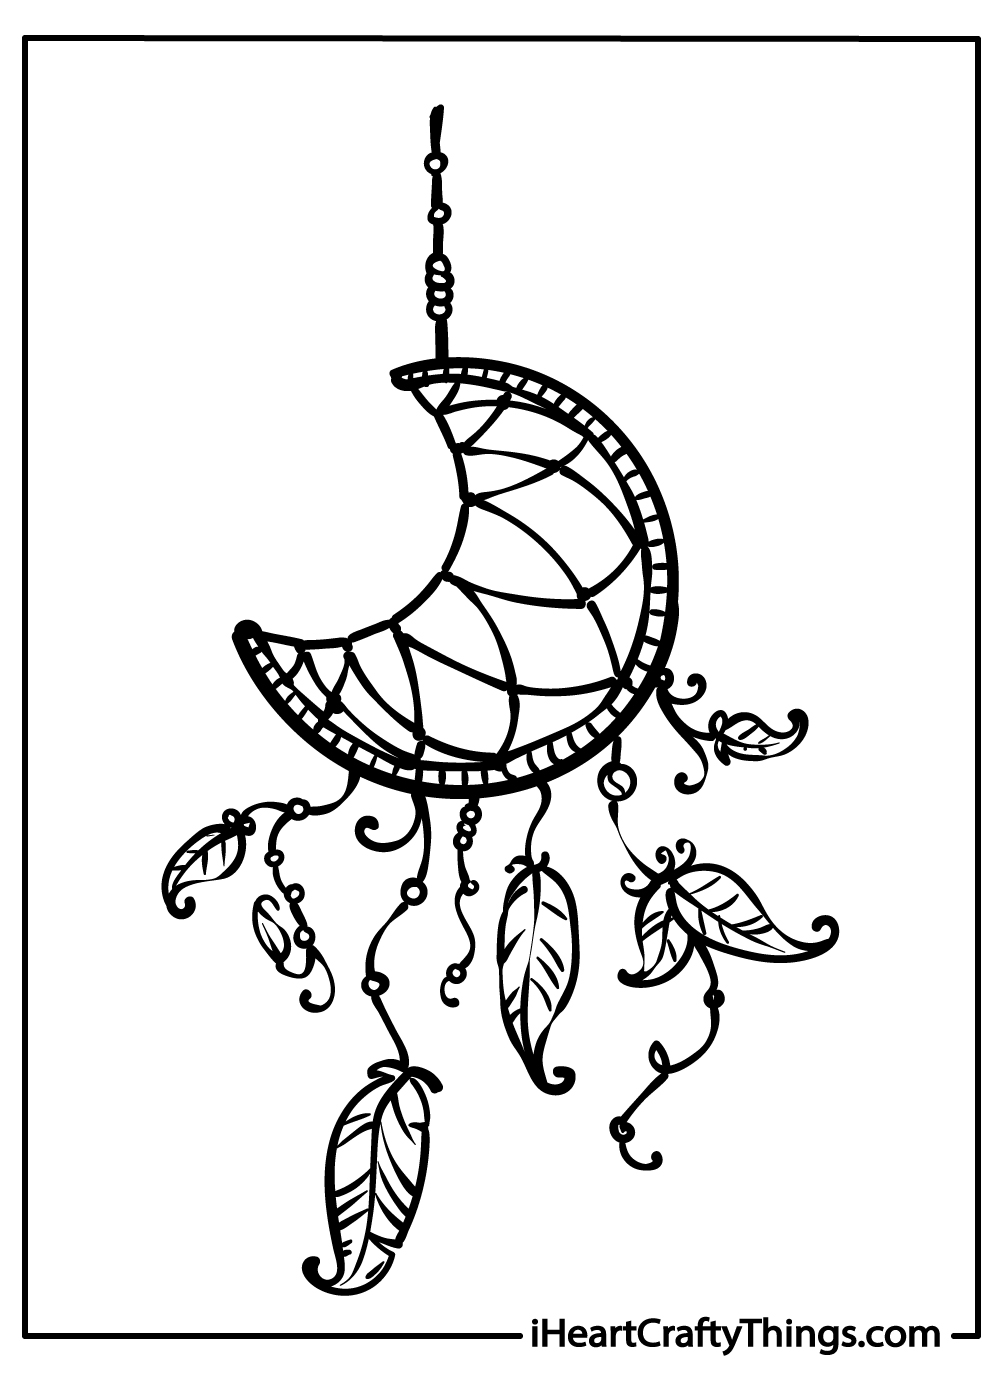 Dream Catcher Coloring Book for Adults: Dream Catcher Supplies